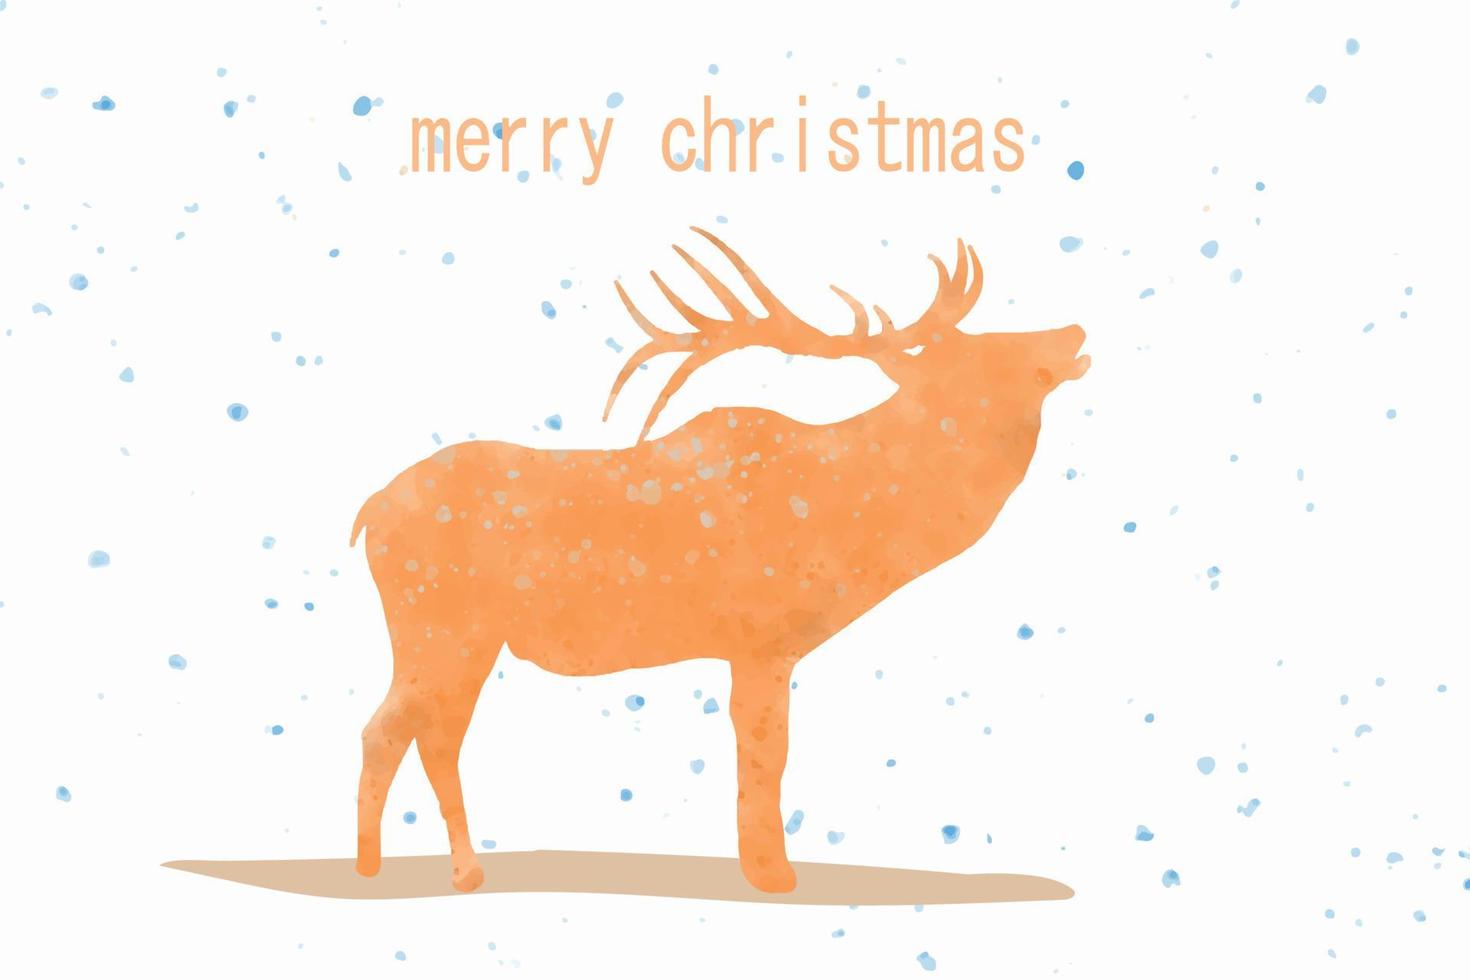 Christmas card with silhouette Deer illustration vector